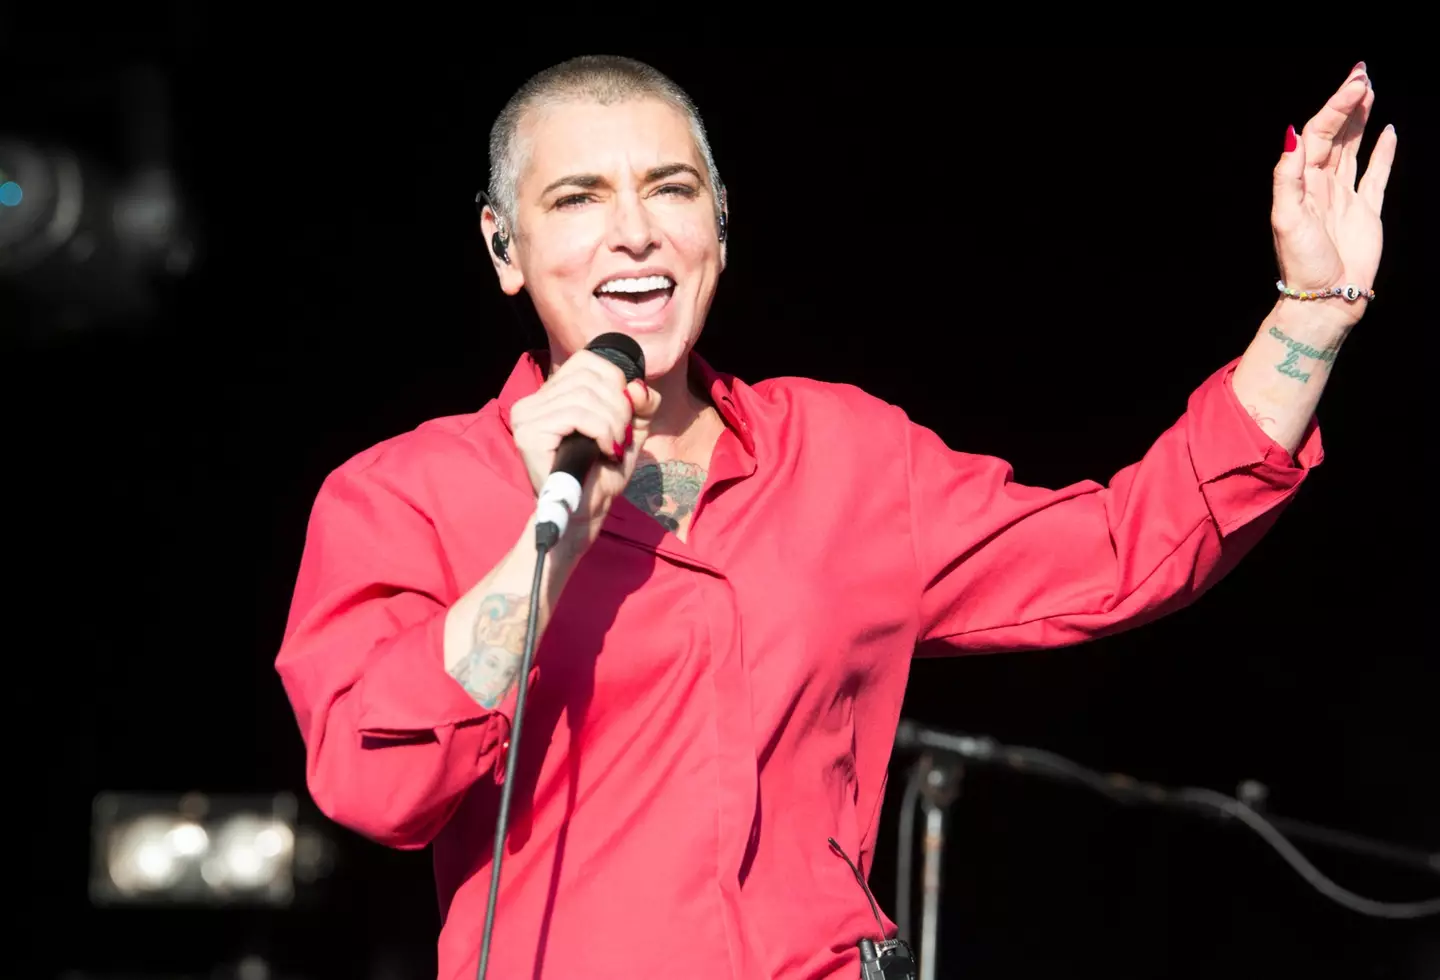 Sinéad O'Connor was also known as a controversial figure.